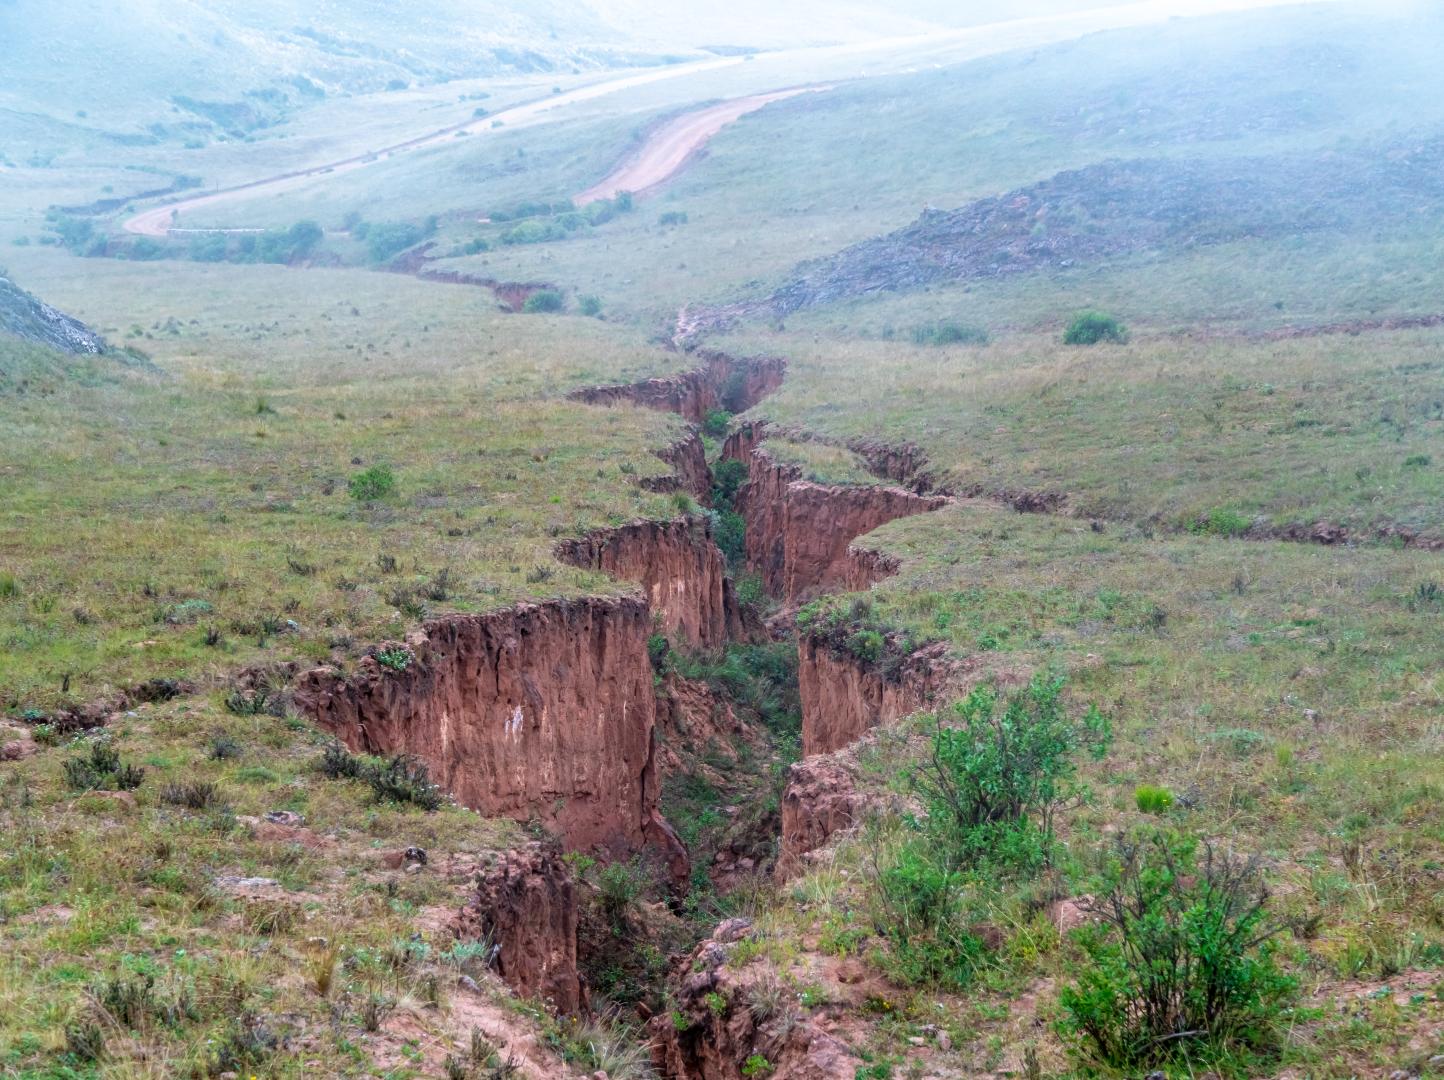 A large crack in the ground after seismic activity.